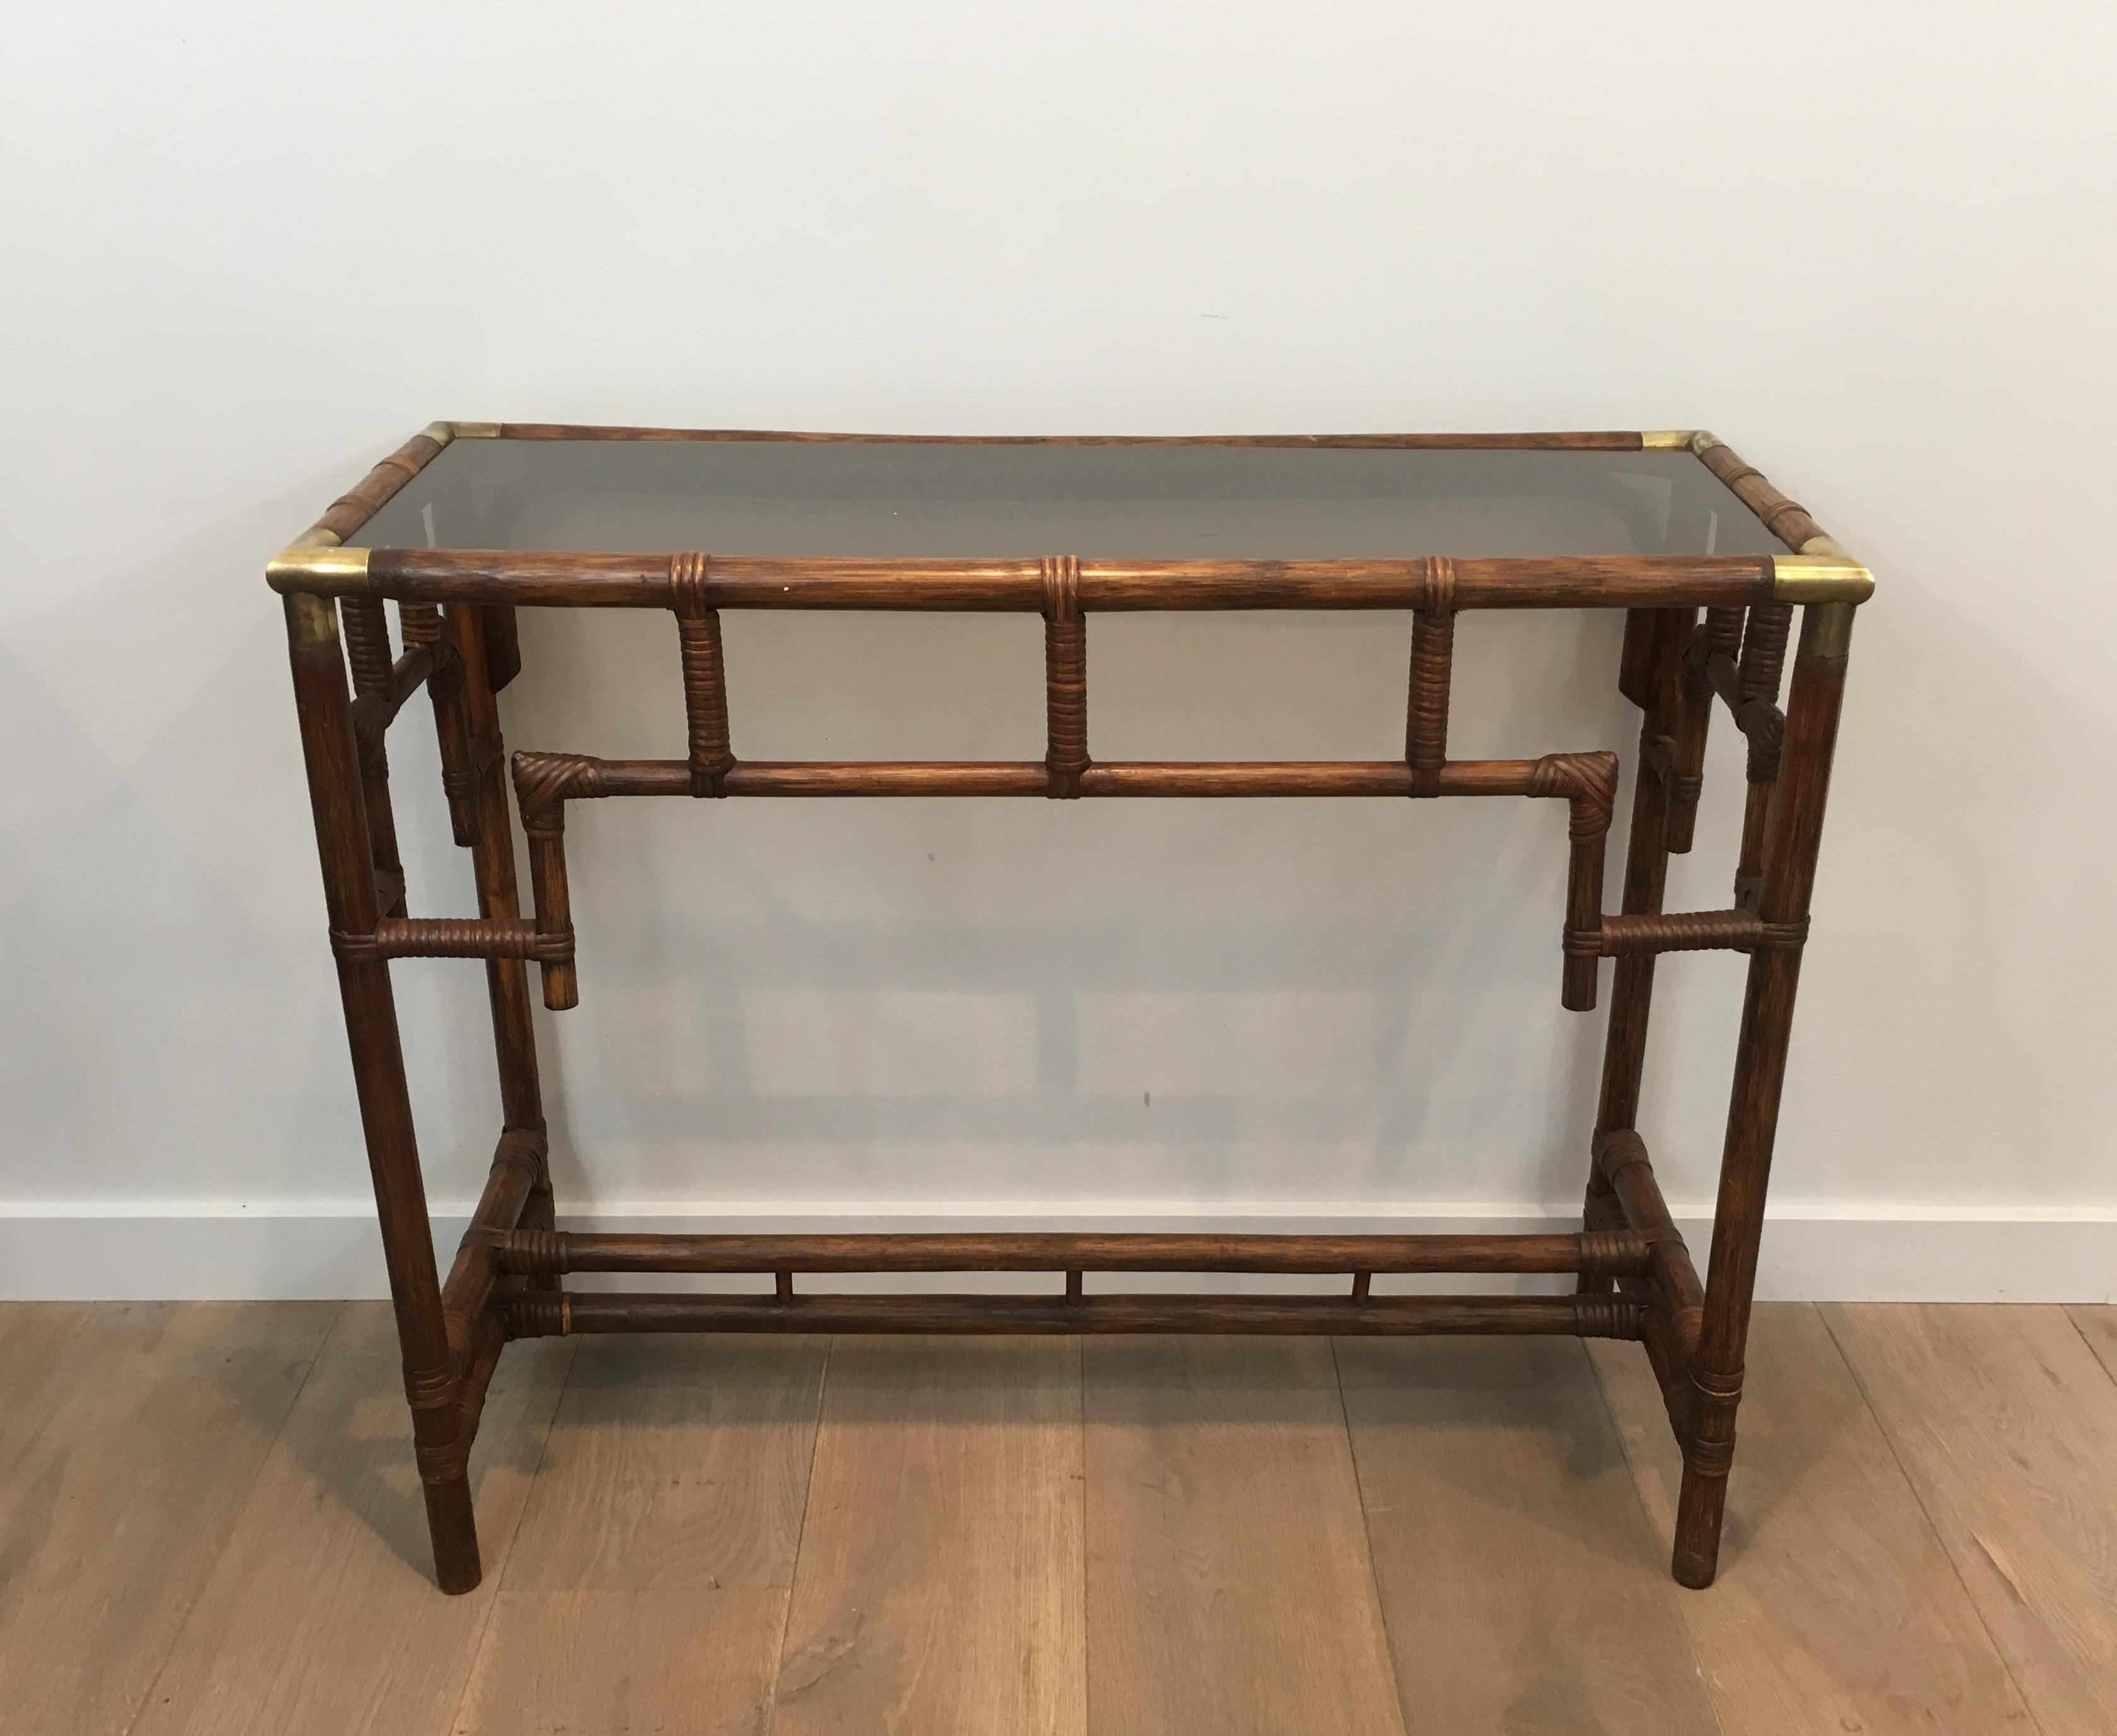 This unusual console table is made of bamboo with brass corners and smoked glass shelf. This is a French work, circa 1970.